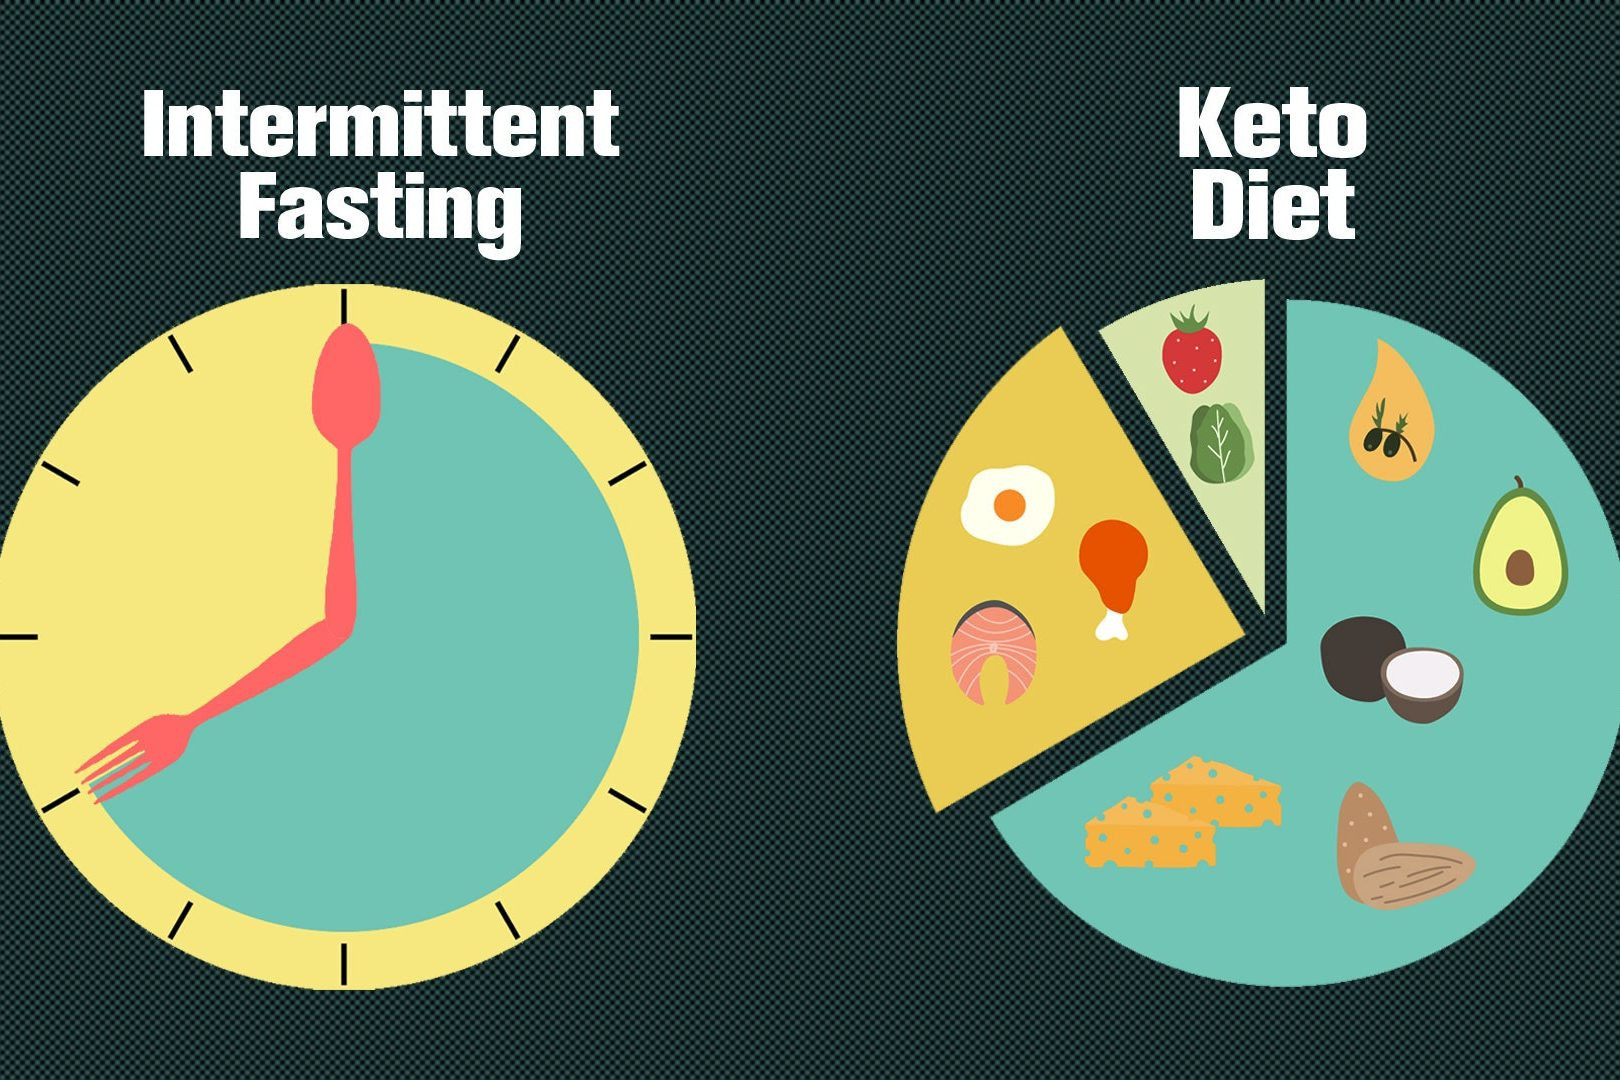 Intermittent Fasting And Keto Diet
 Keto And Intermittent Fasting